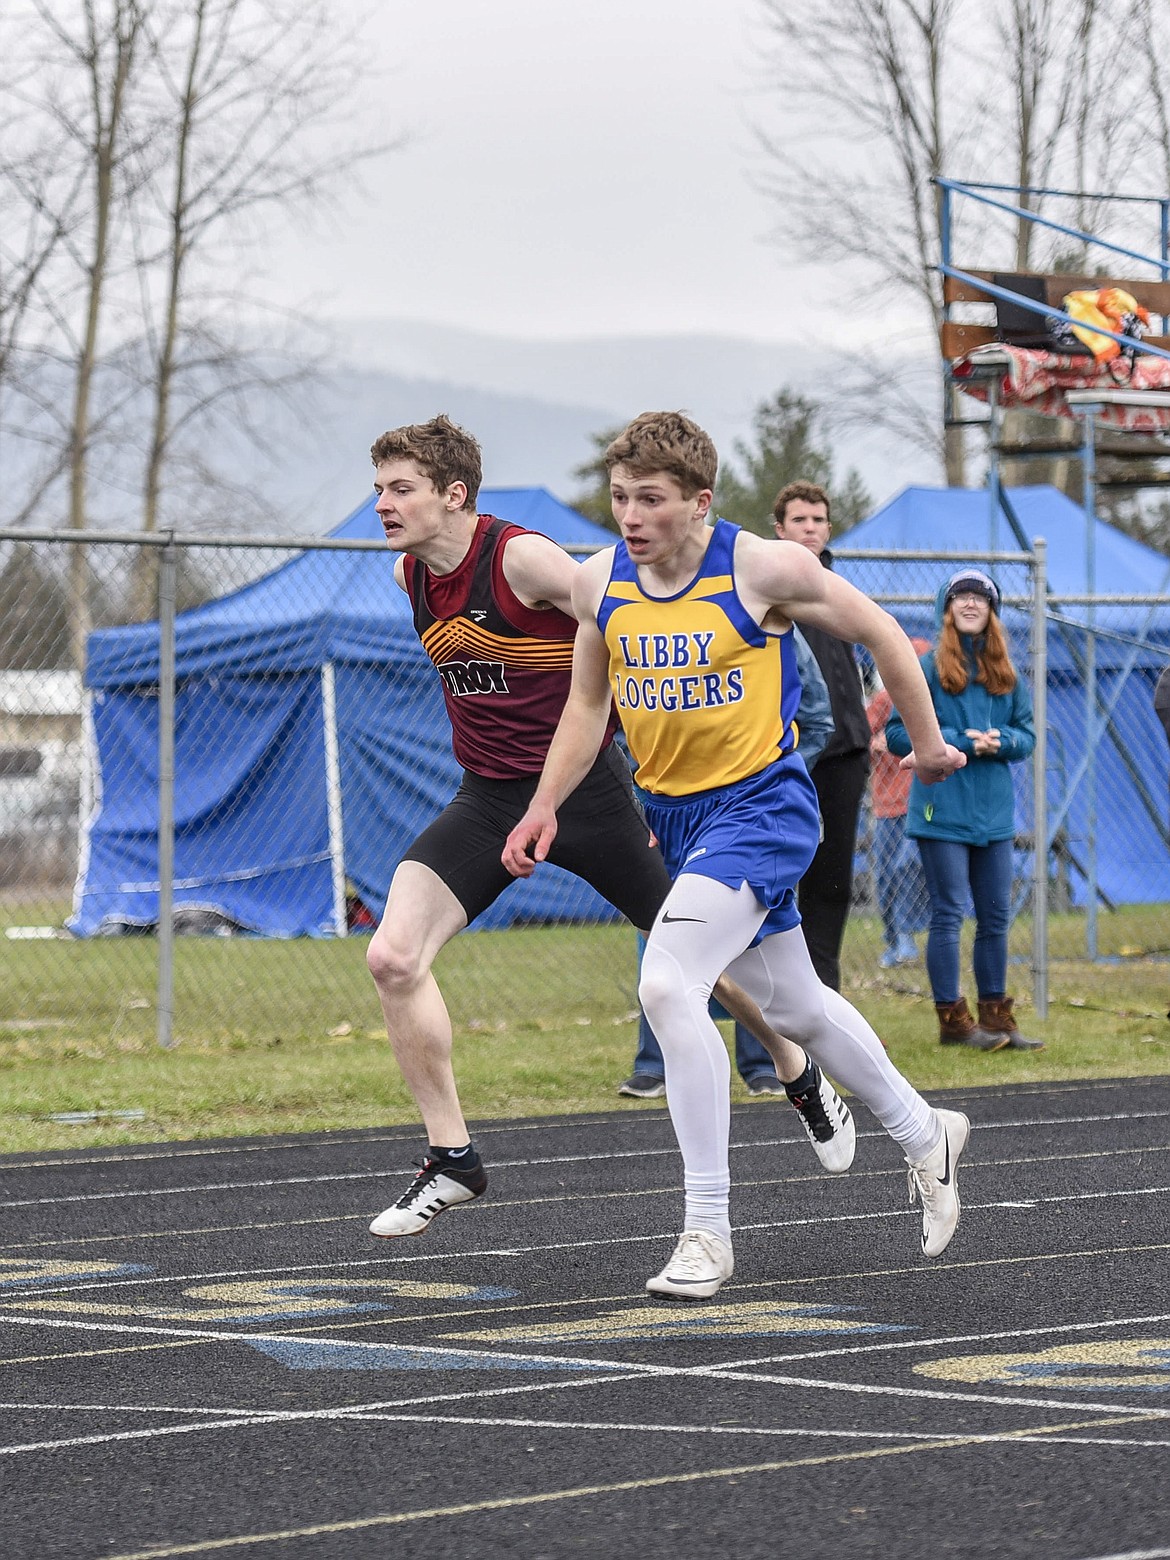 Troy senior Hunter Leighty and Libby sophomore Jay Beagle come close to a photo finish in the 400 meter dash, Saturday at the Libby Invitational. Beagle finished in a season-record 51.36 seconds, and Leighty took second with a personal-best 51.46 seconds. (Ben Kibbey/The Western News)